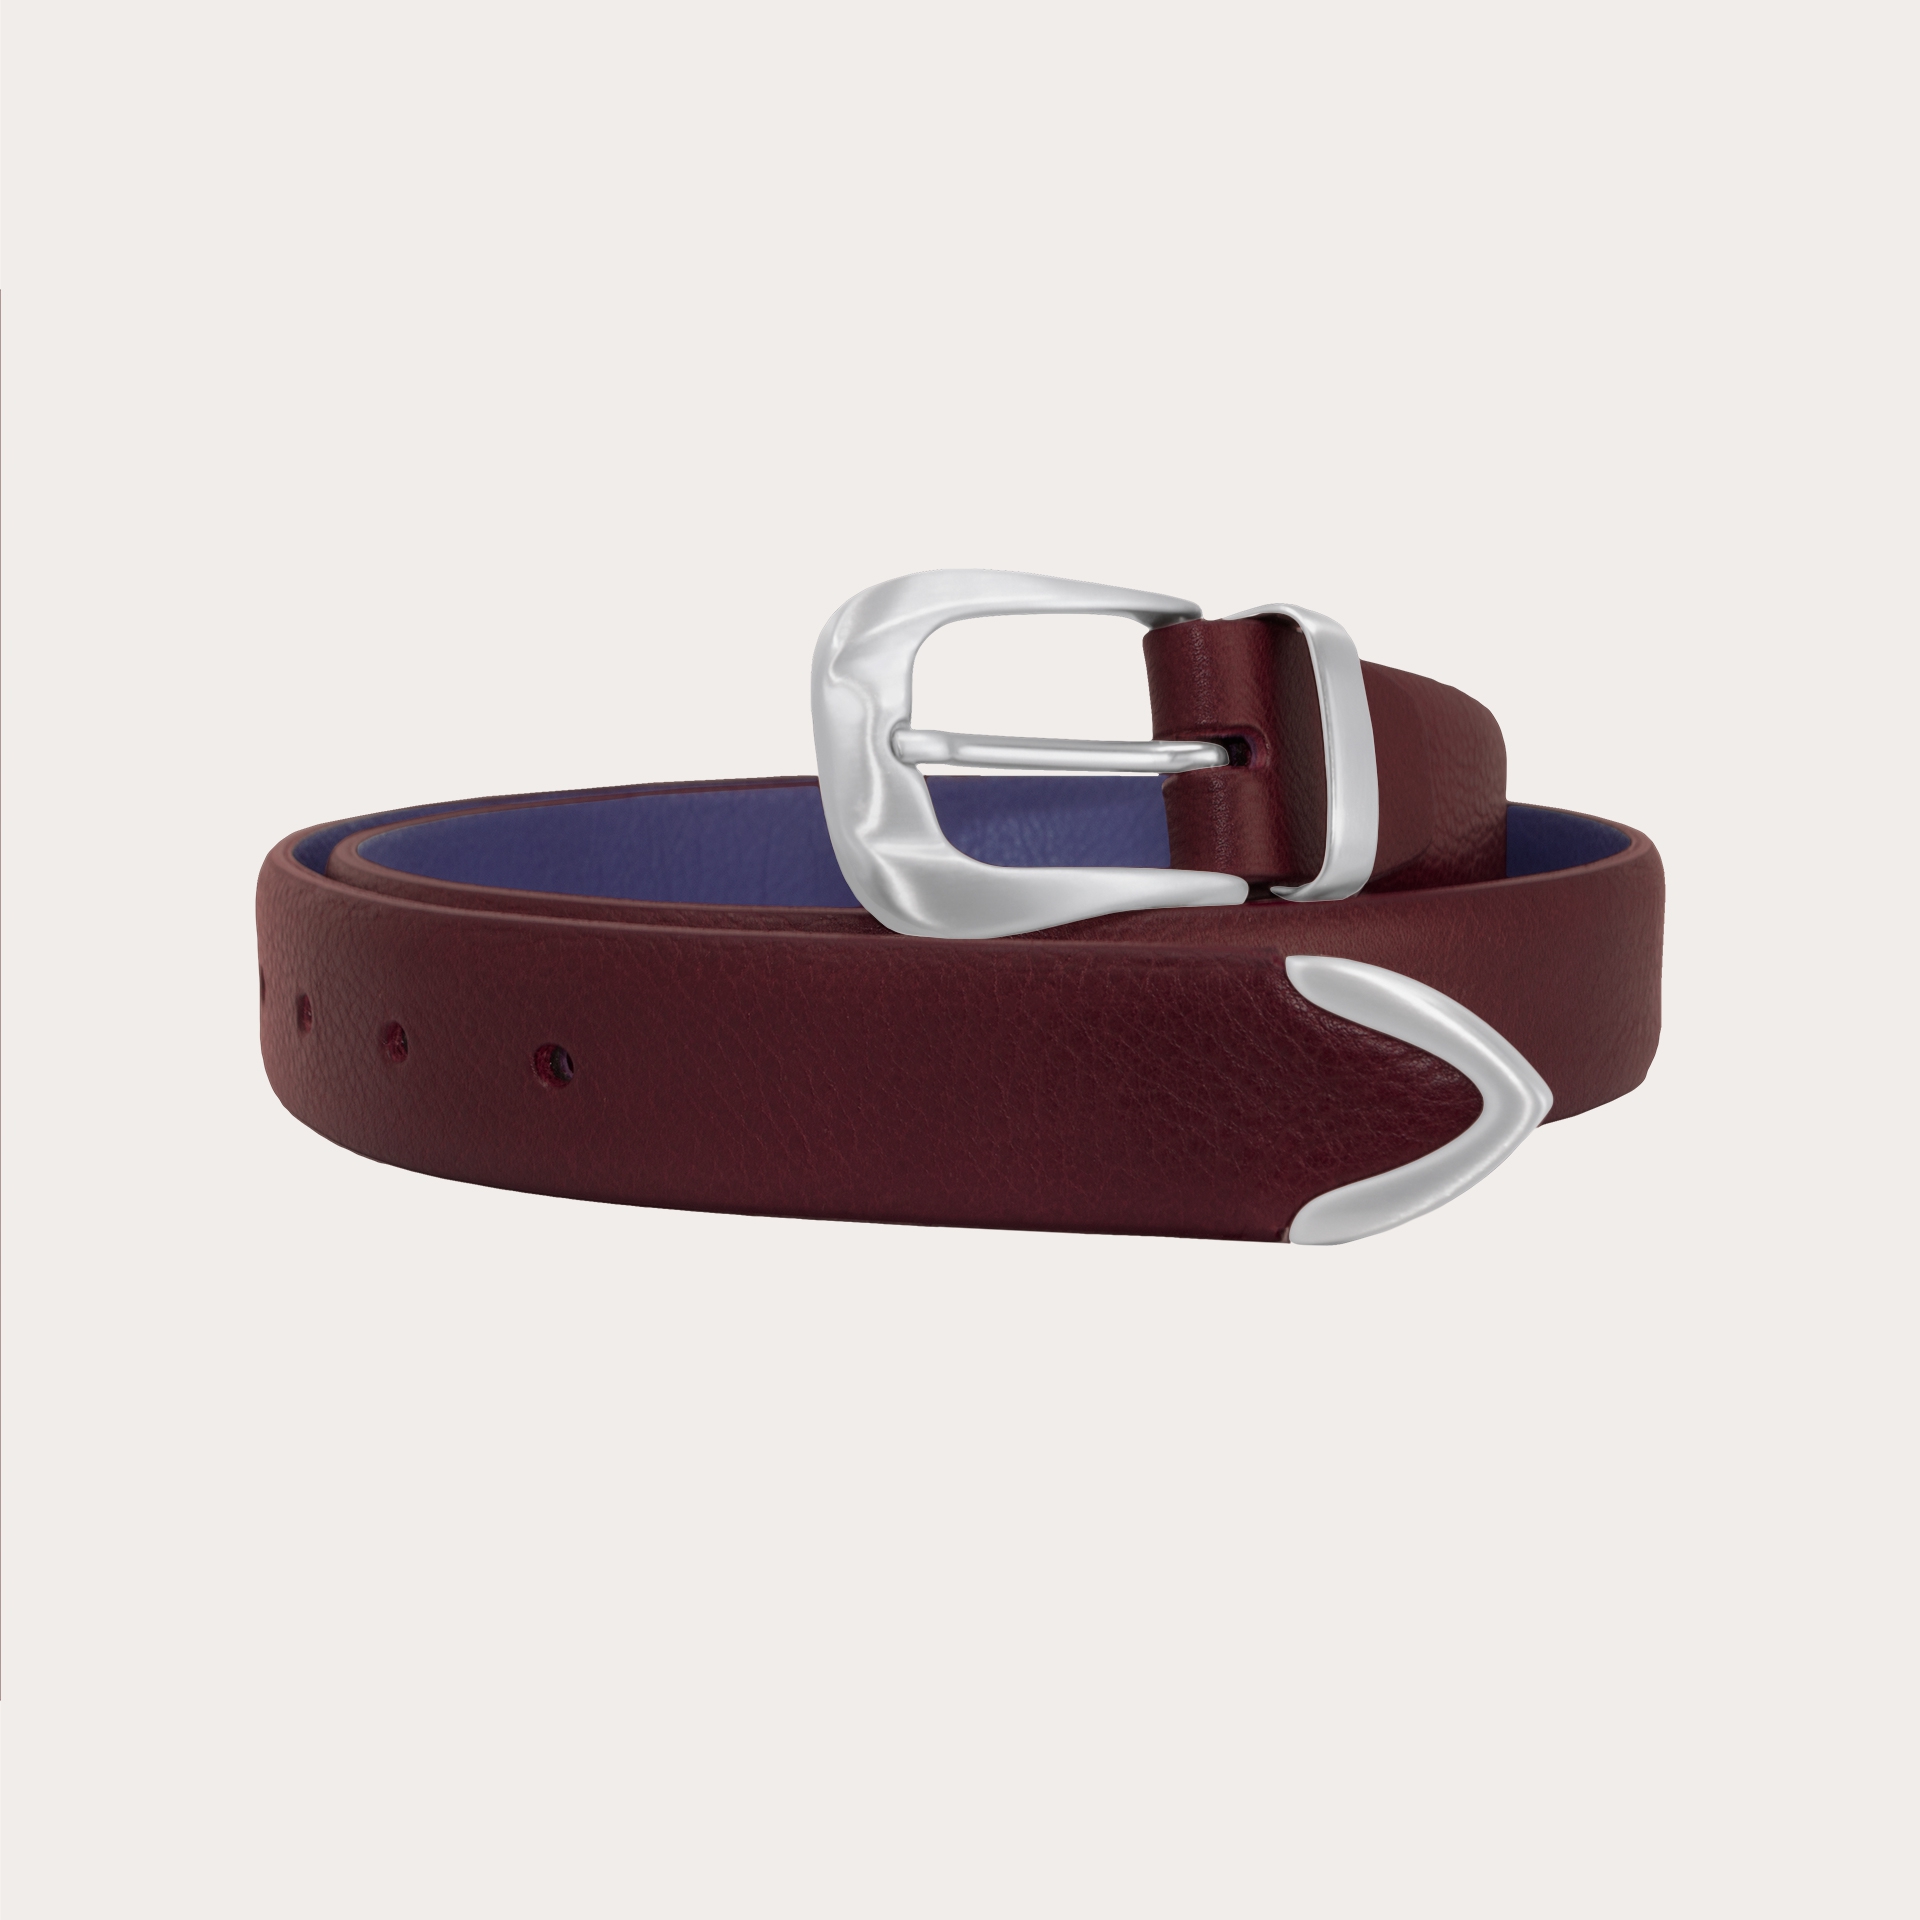 Thin raw cut leather belt with loop, buckle and tip in metal, bordeaux